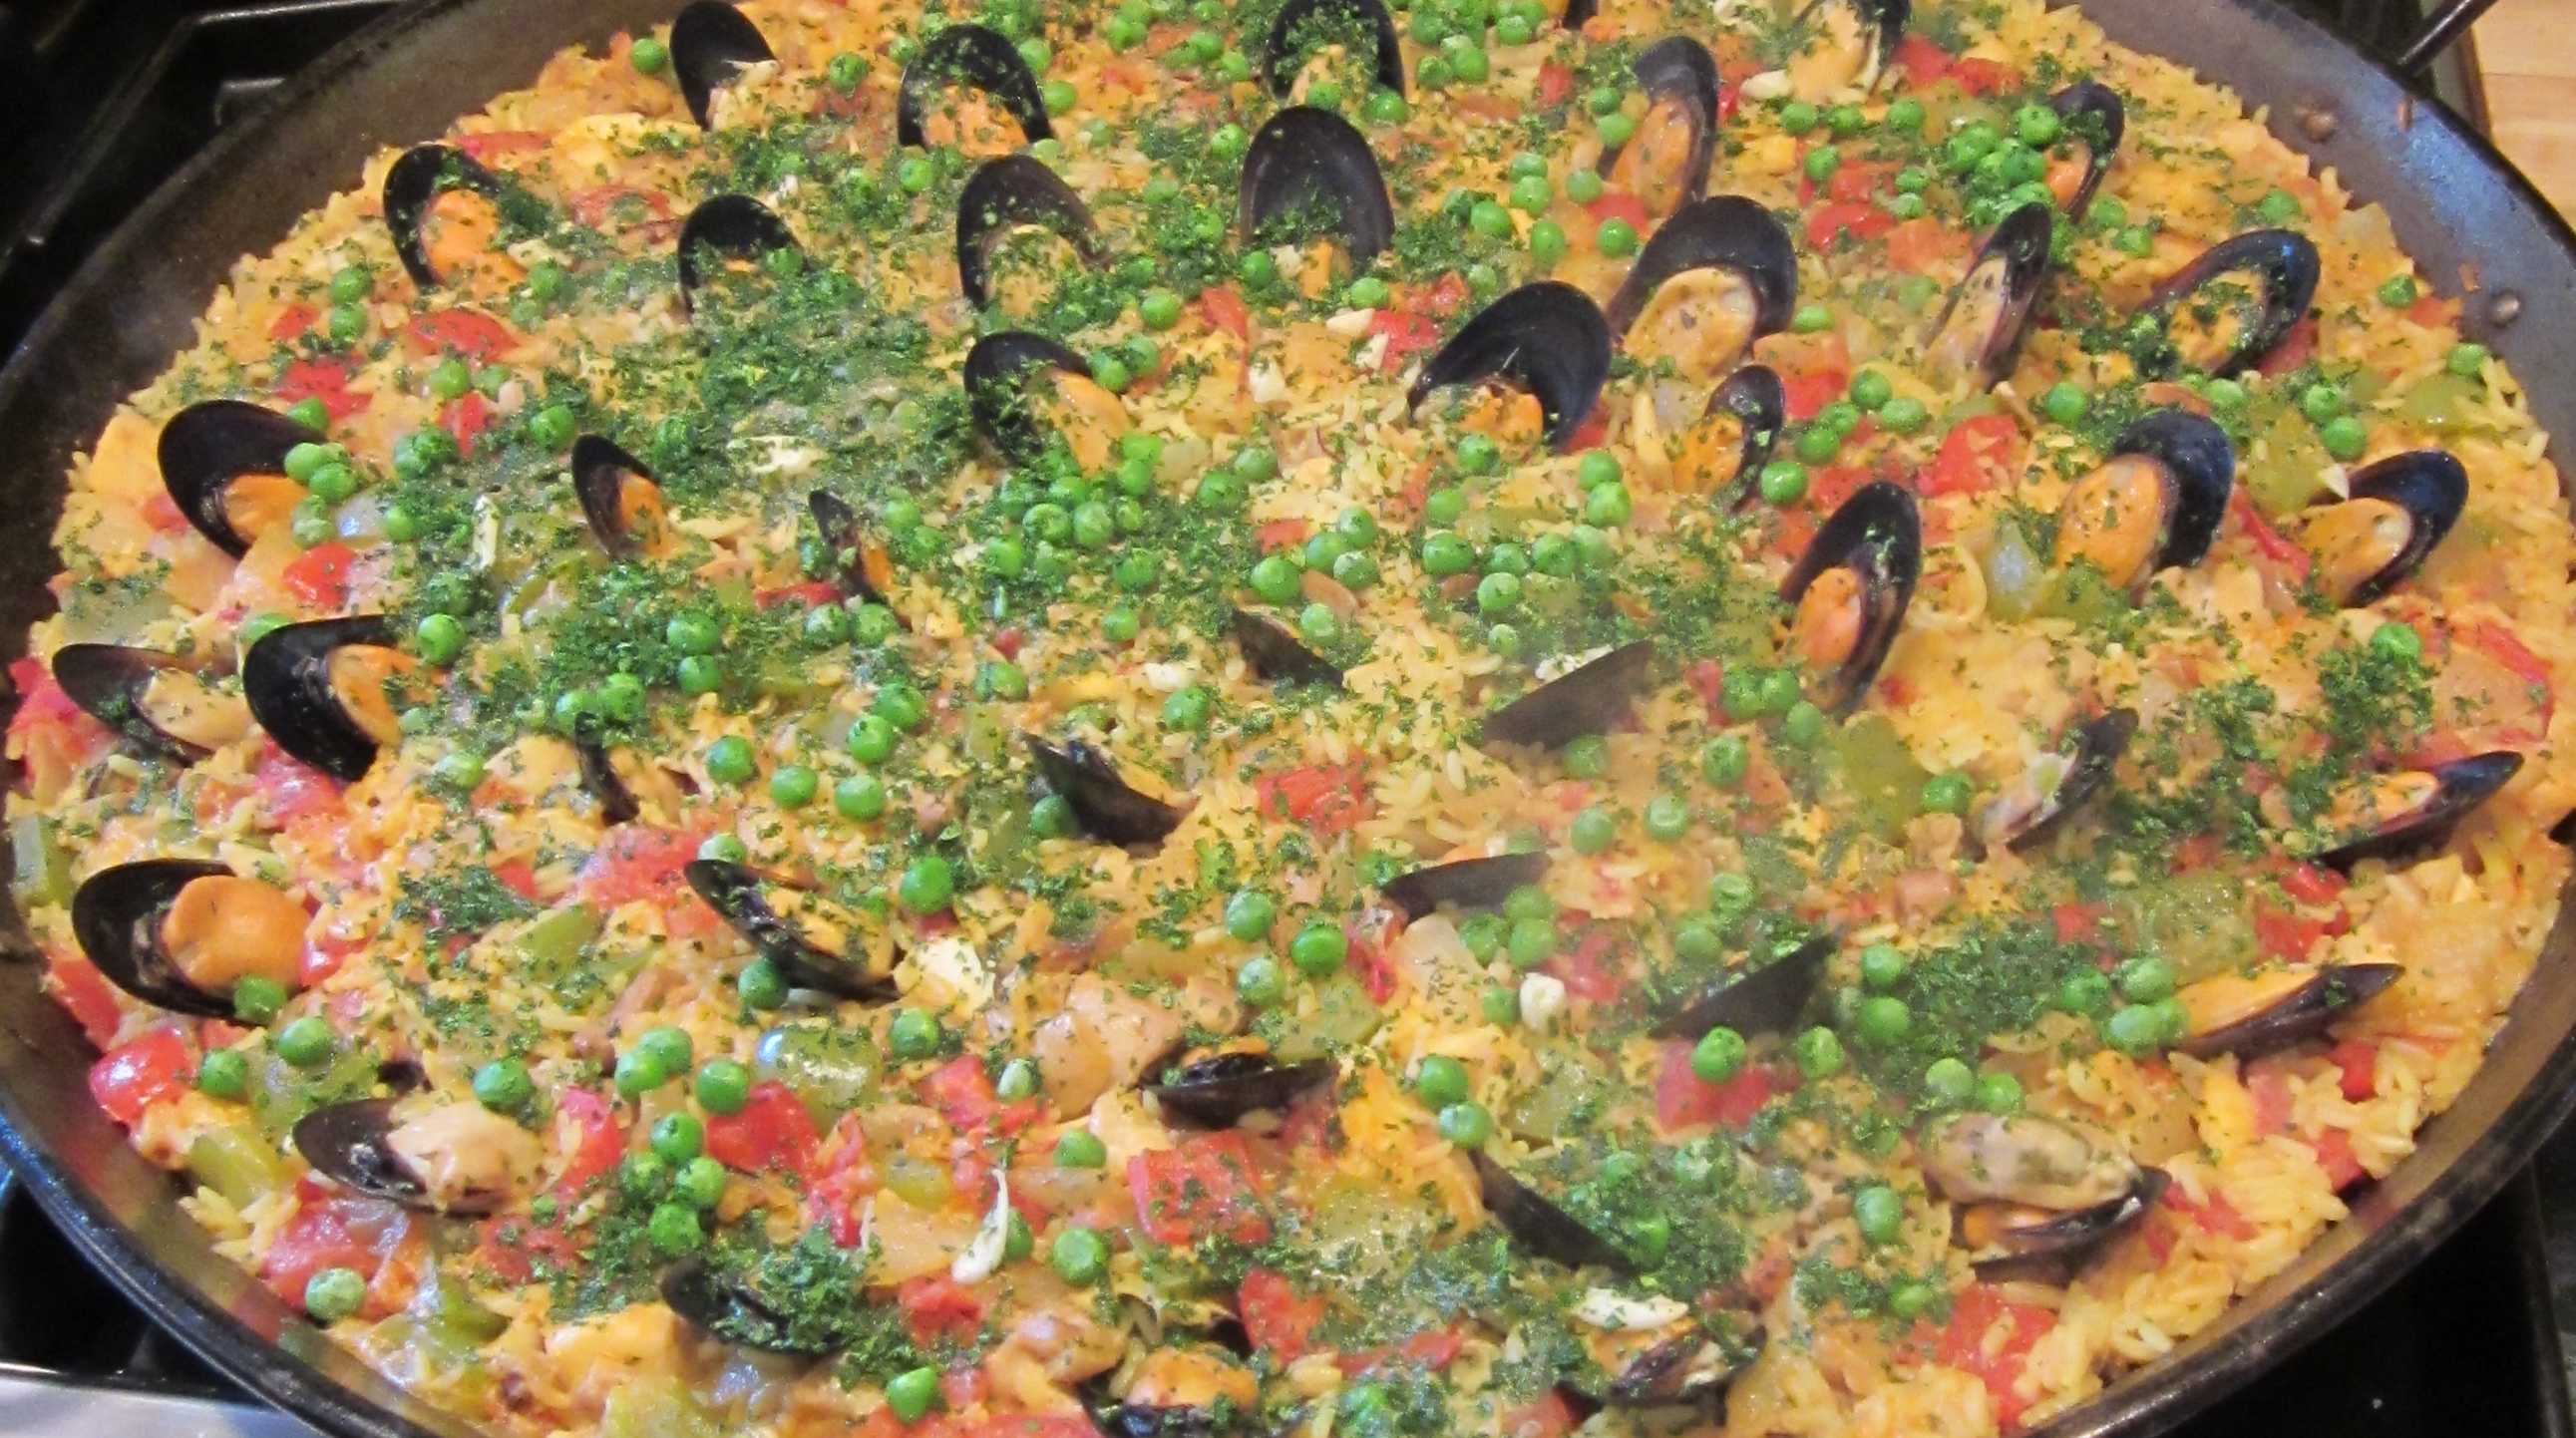 Picture perfect paella at The Village Table